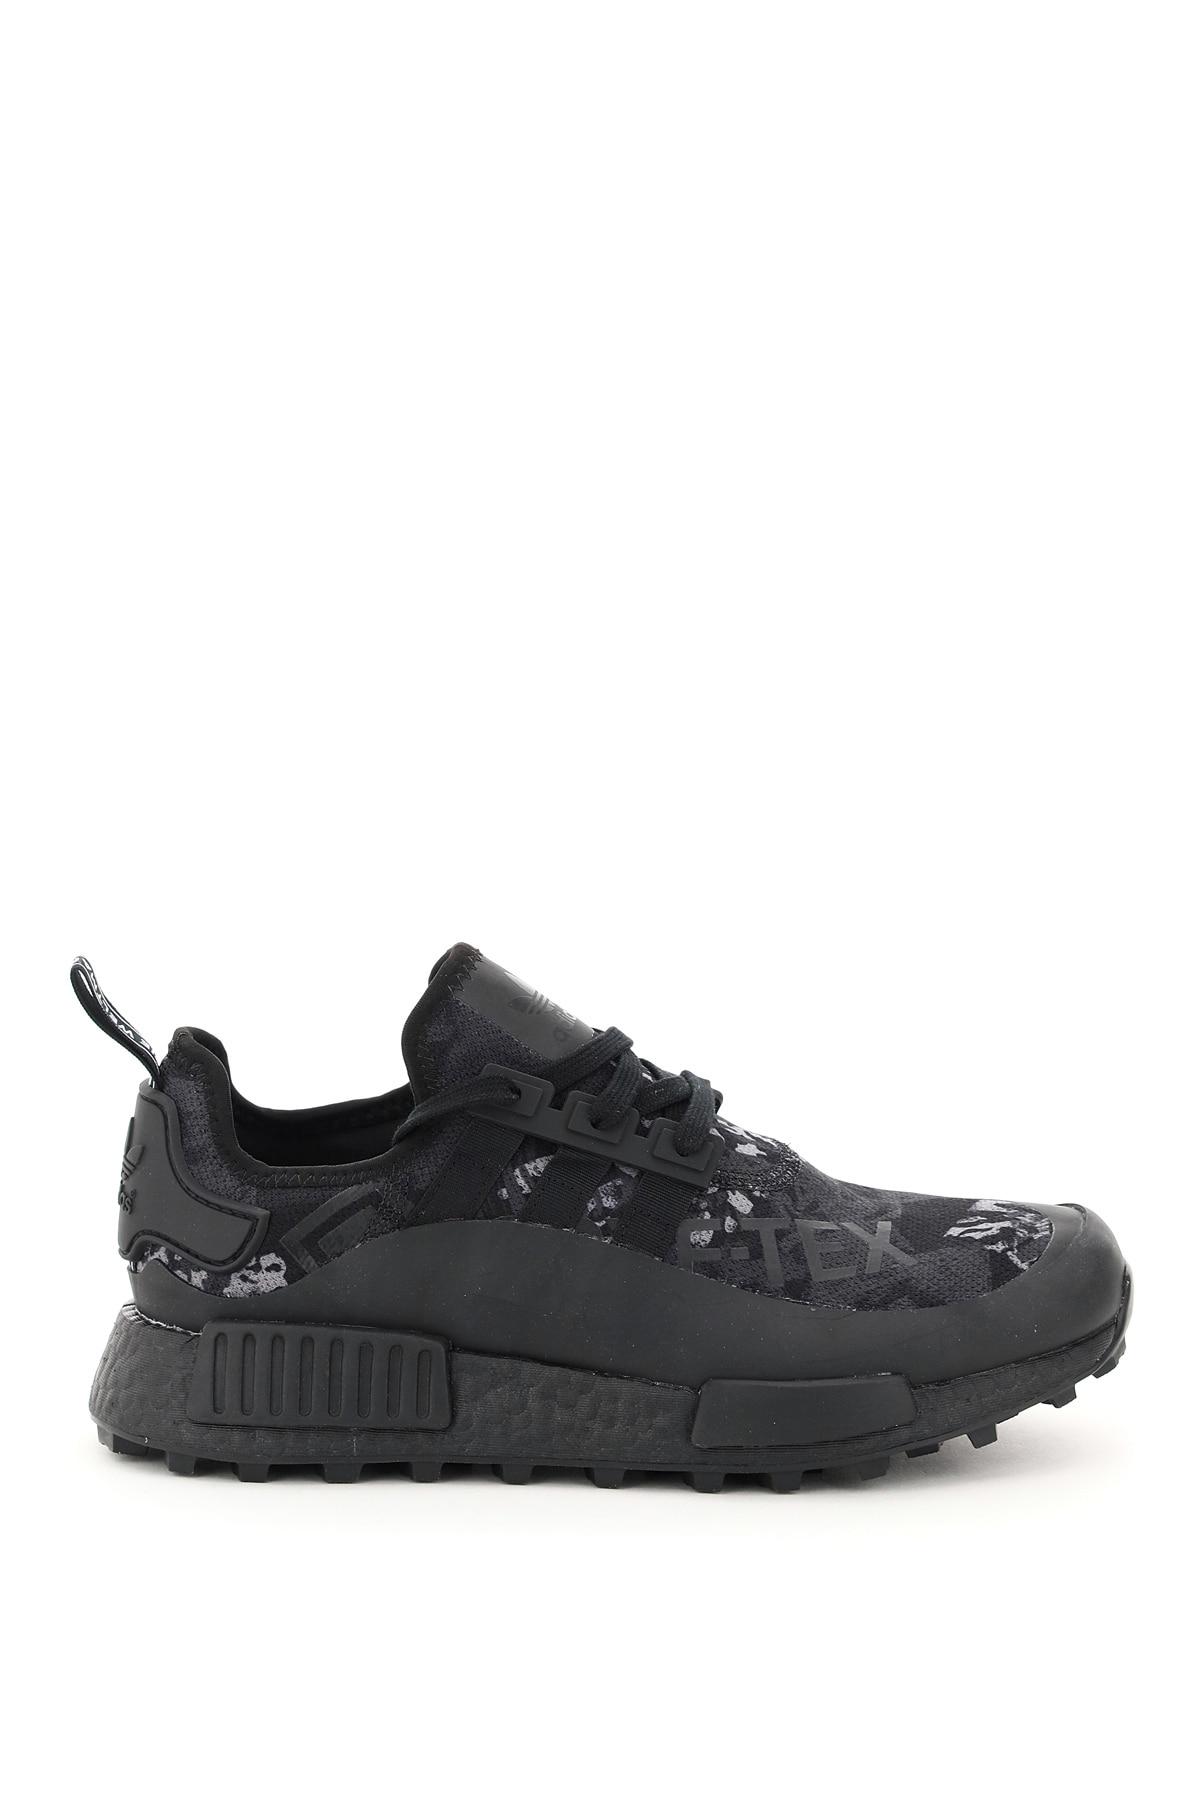 adidas Rubber Nomad Nmd R1 Trail Gore-tex Sneakers in Black,Grey (Black)  for Men | Lyst